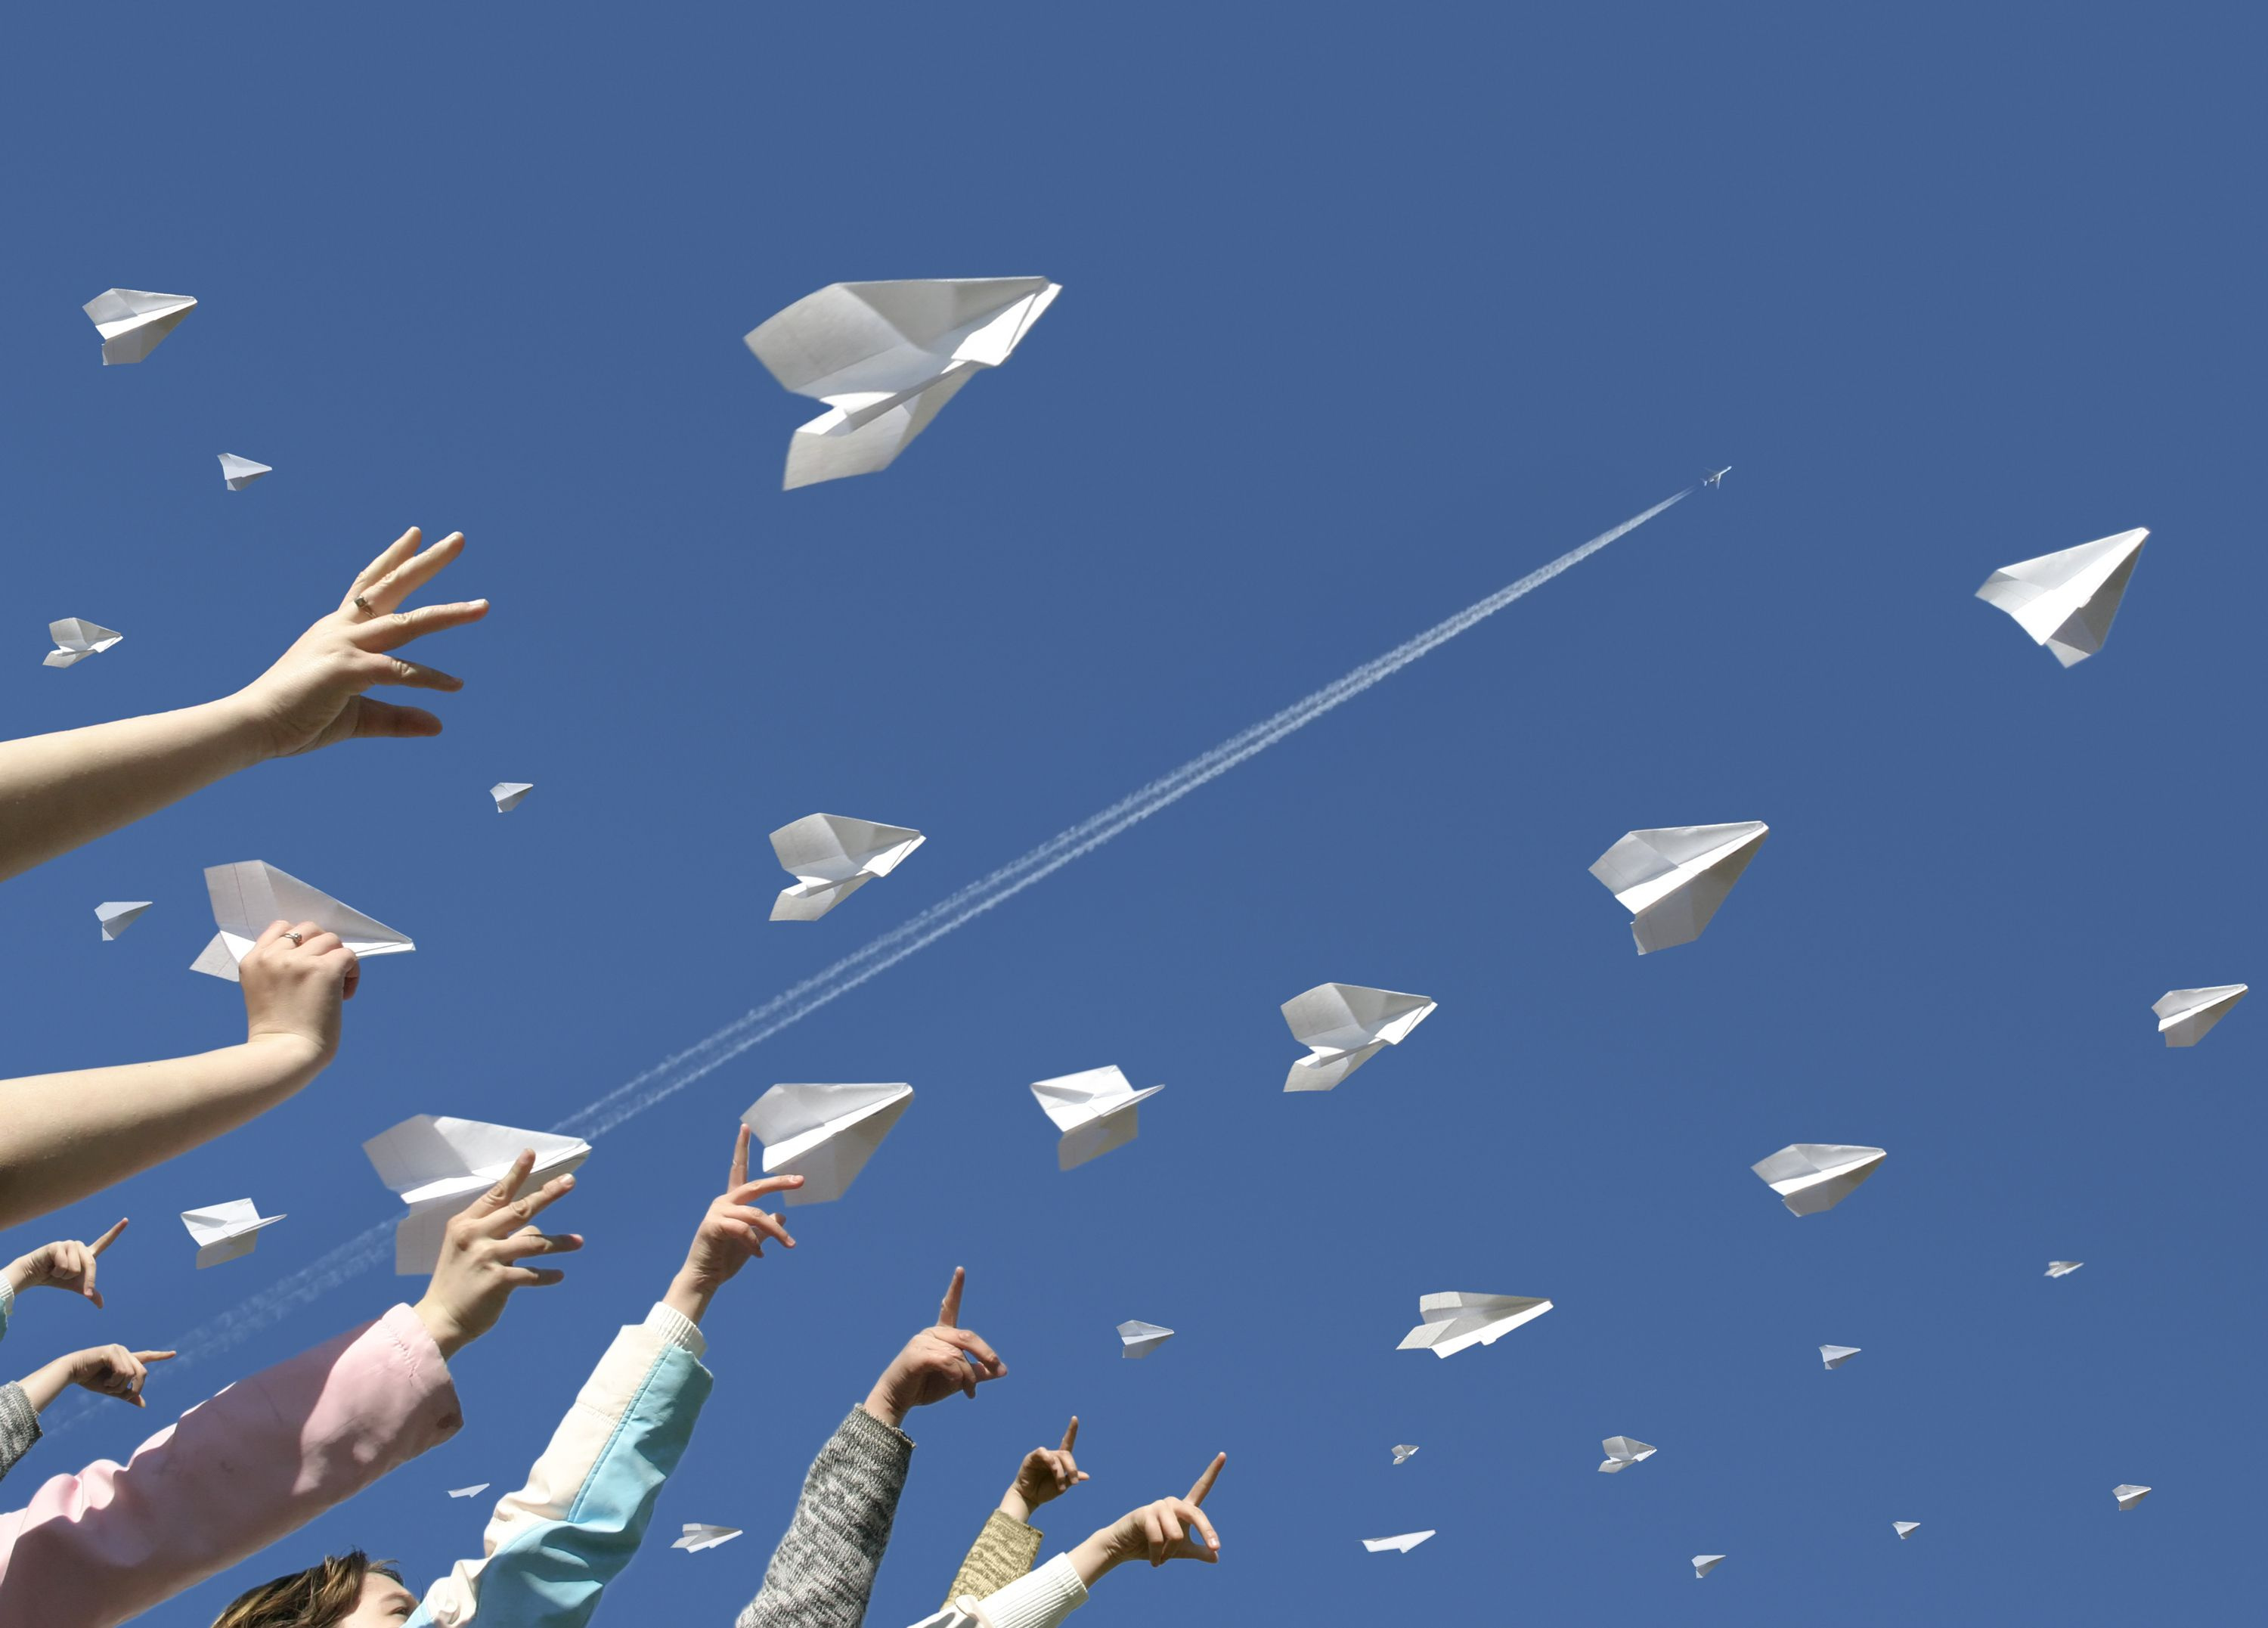 crypto projects launches, paper airplanes